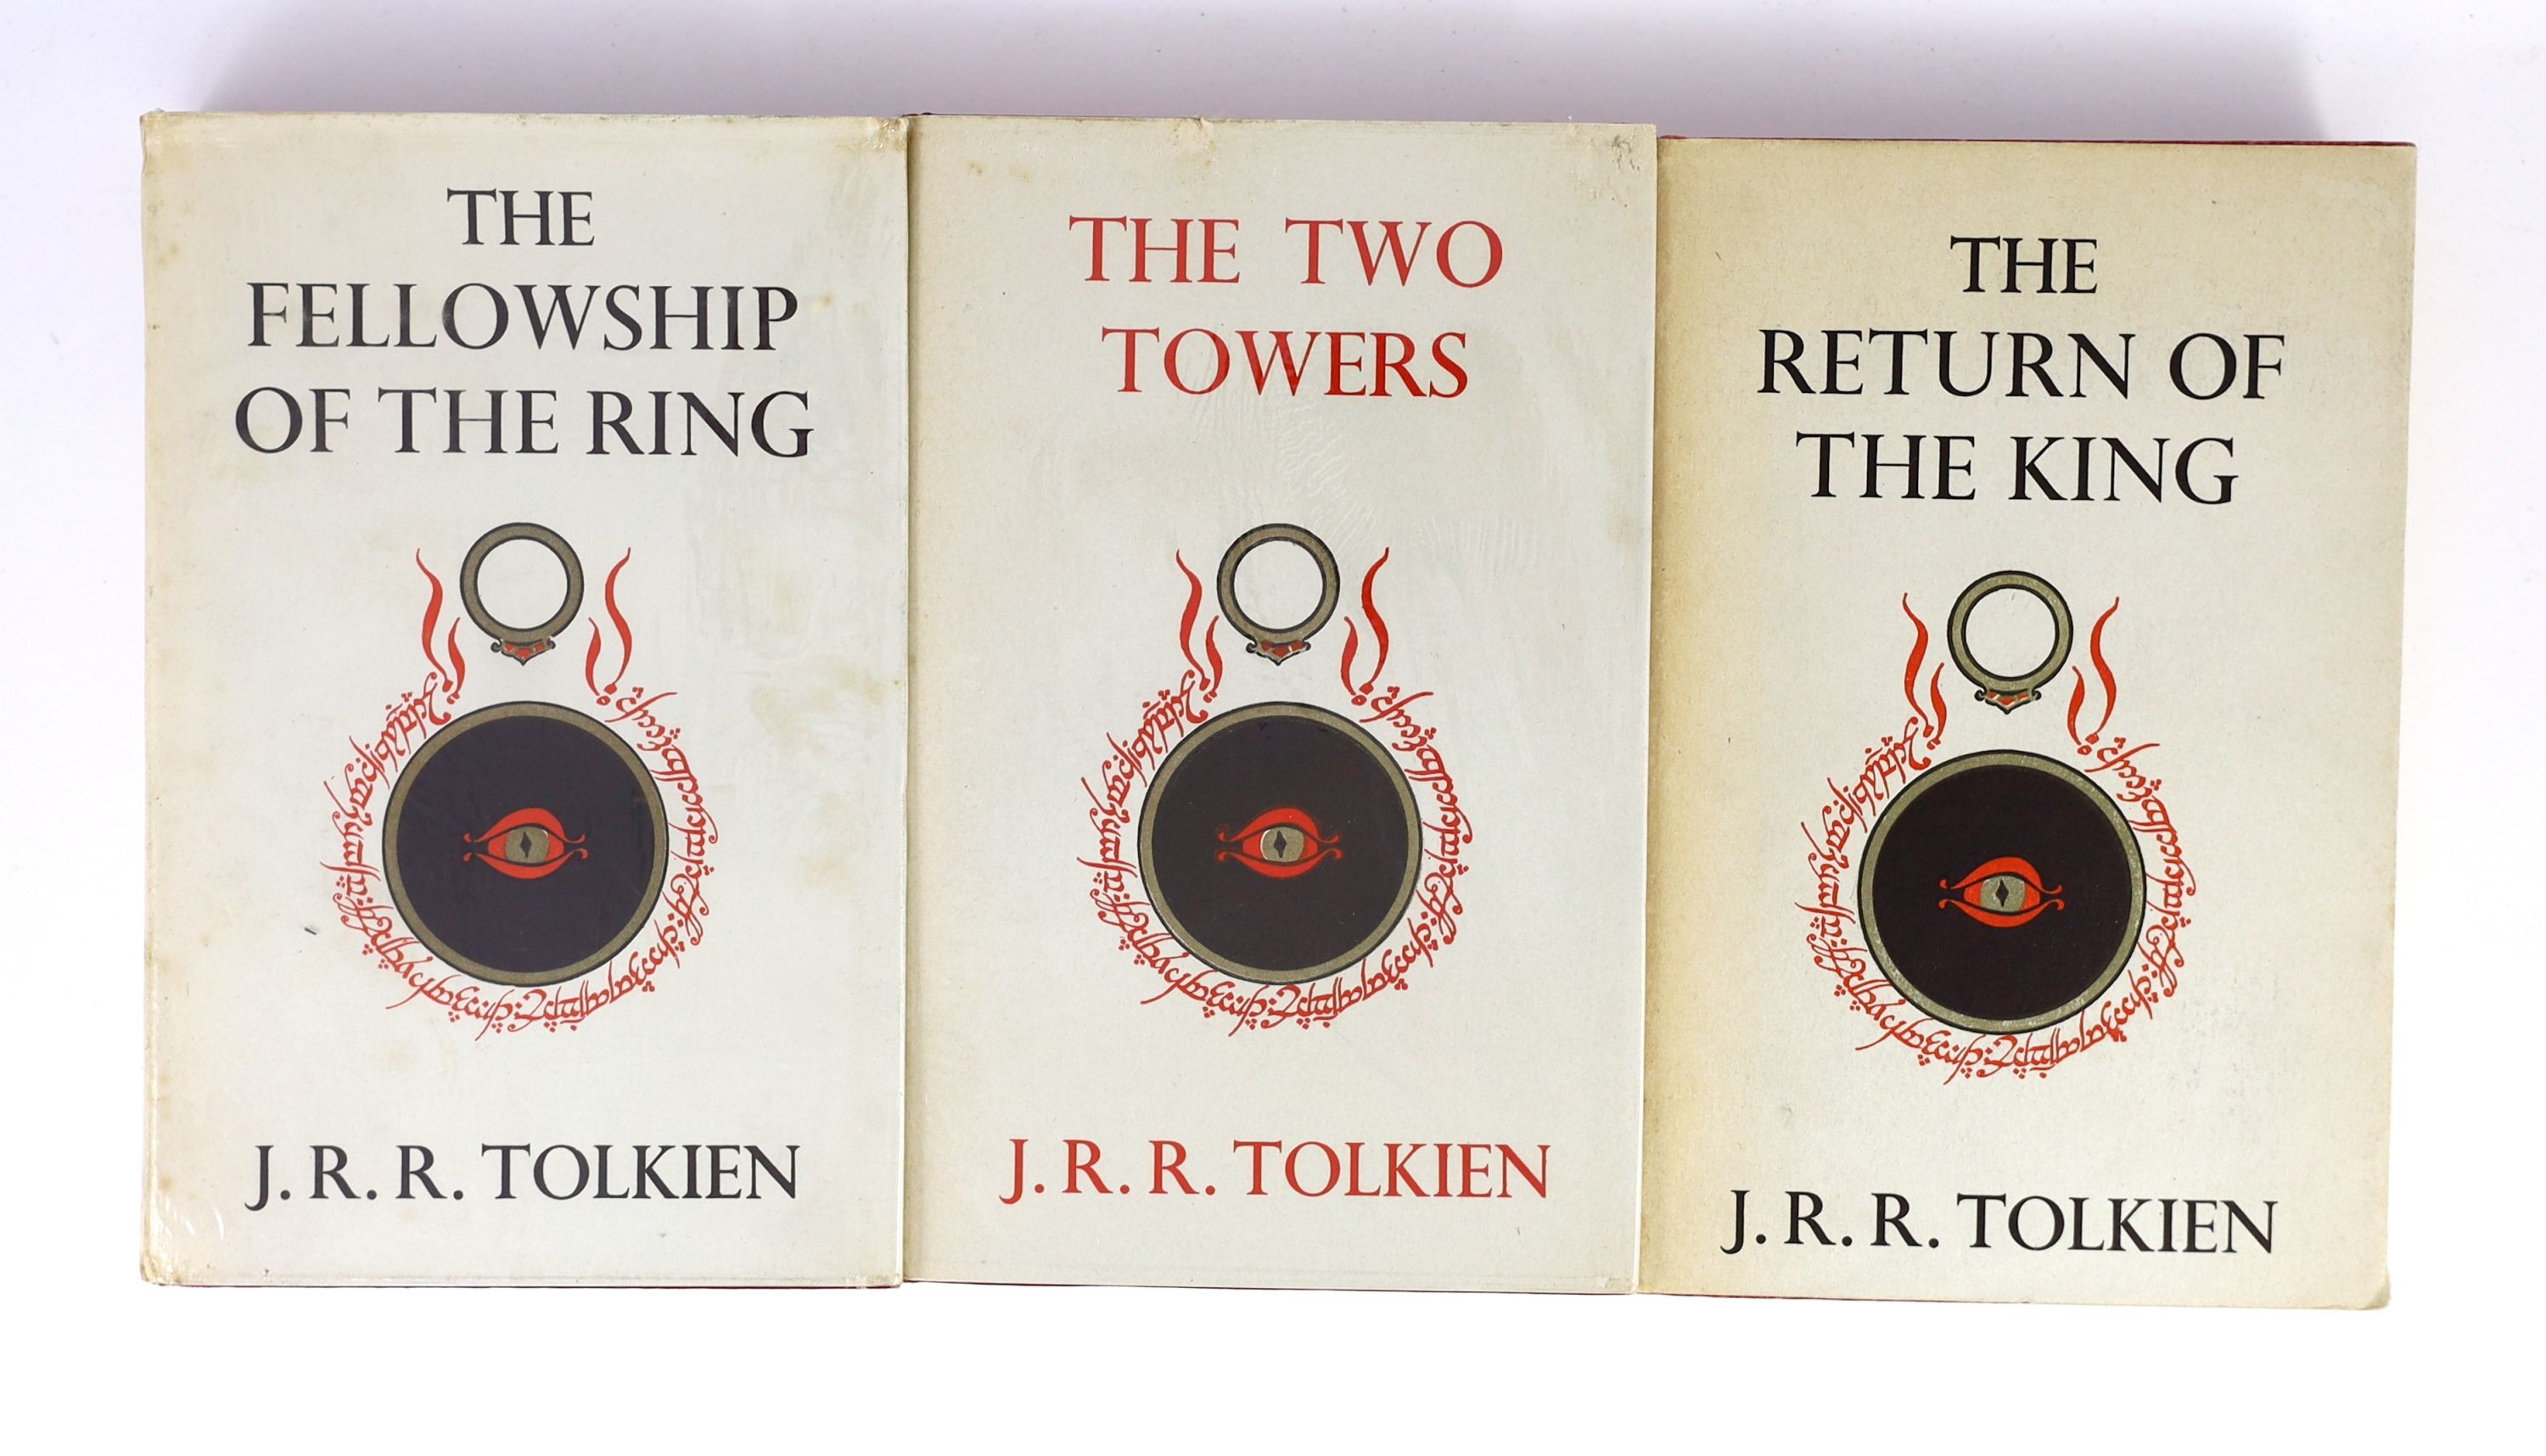 Tolkien, J.R.R - Lord of the Rings - The Fellowship of the Ring, 11th impression, 1961, The Two Towers, 10th impression, 1963 and The Return of the King, 11th impression, 1965, all with unclipped d/j’s, retaining folded